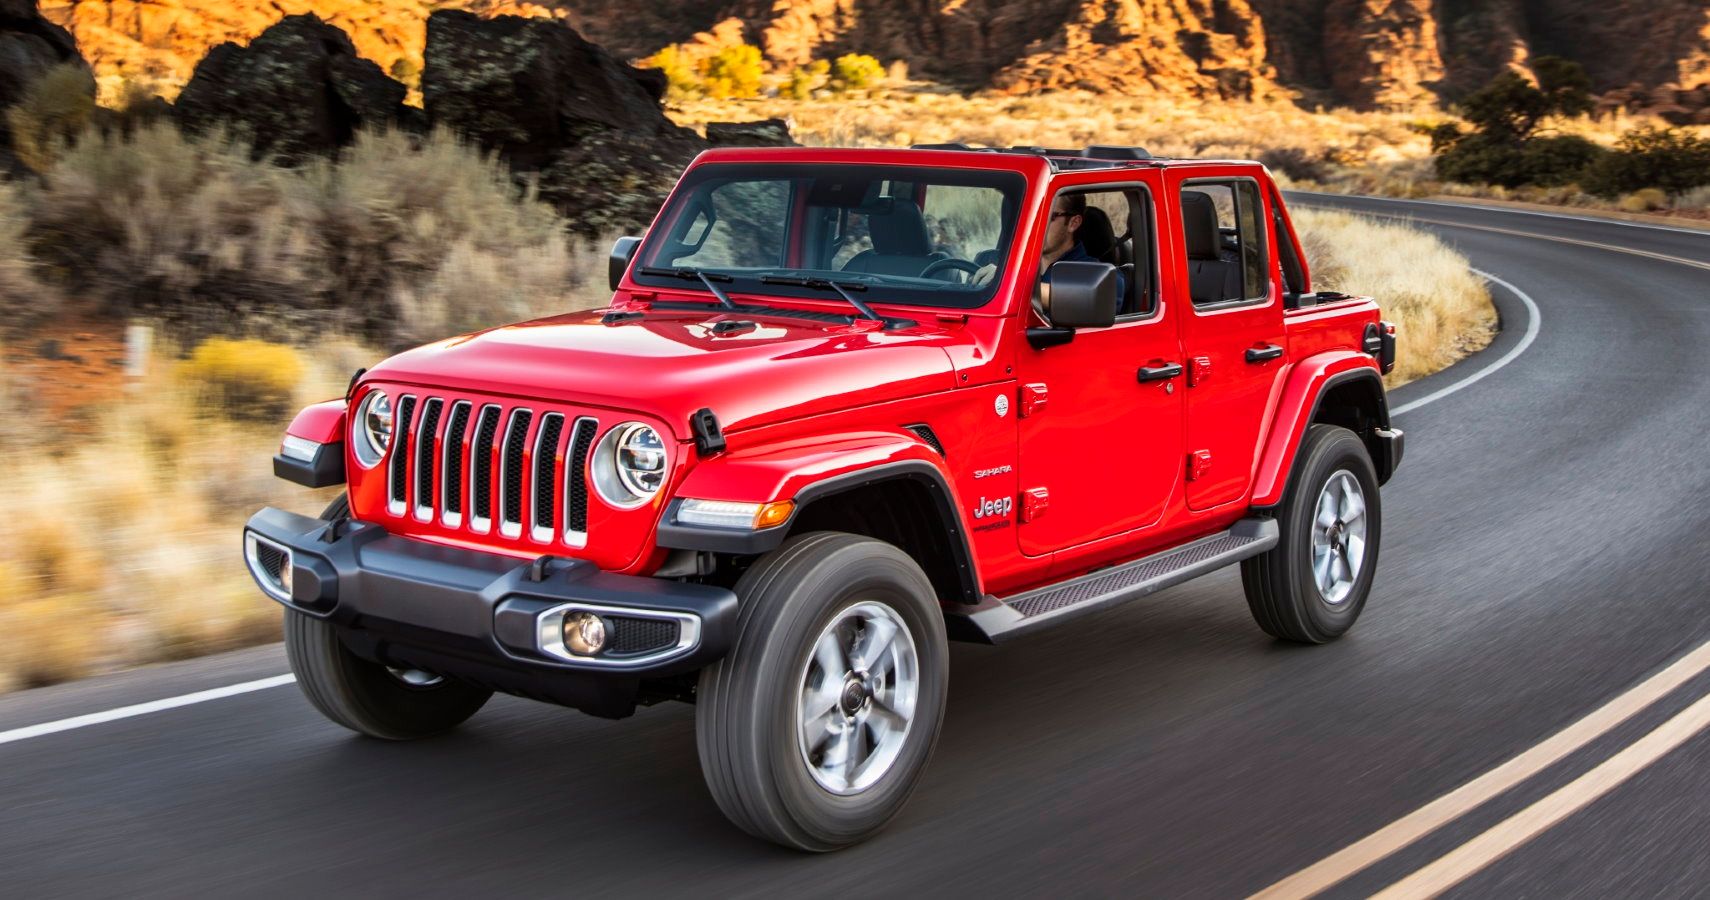 Jeep Wrangler EcoDiesel Now The Most Fuel-Efficient Wrangler Ever Made